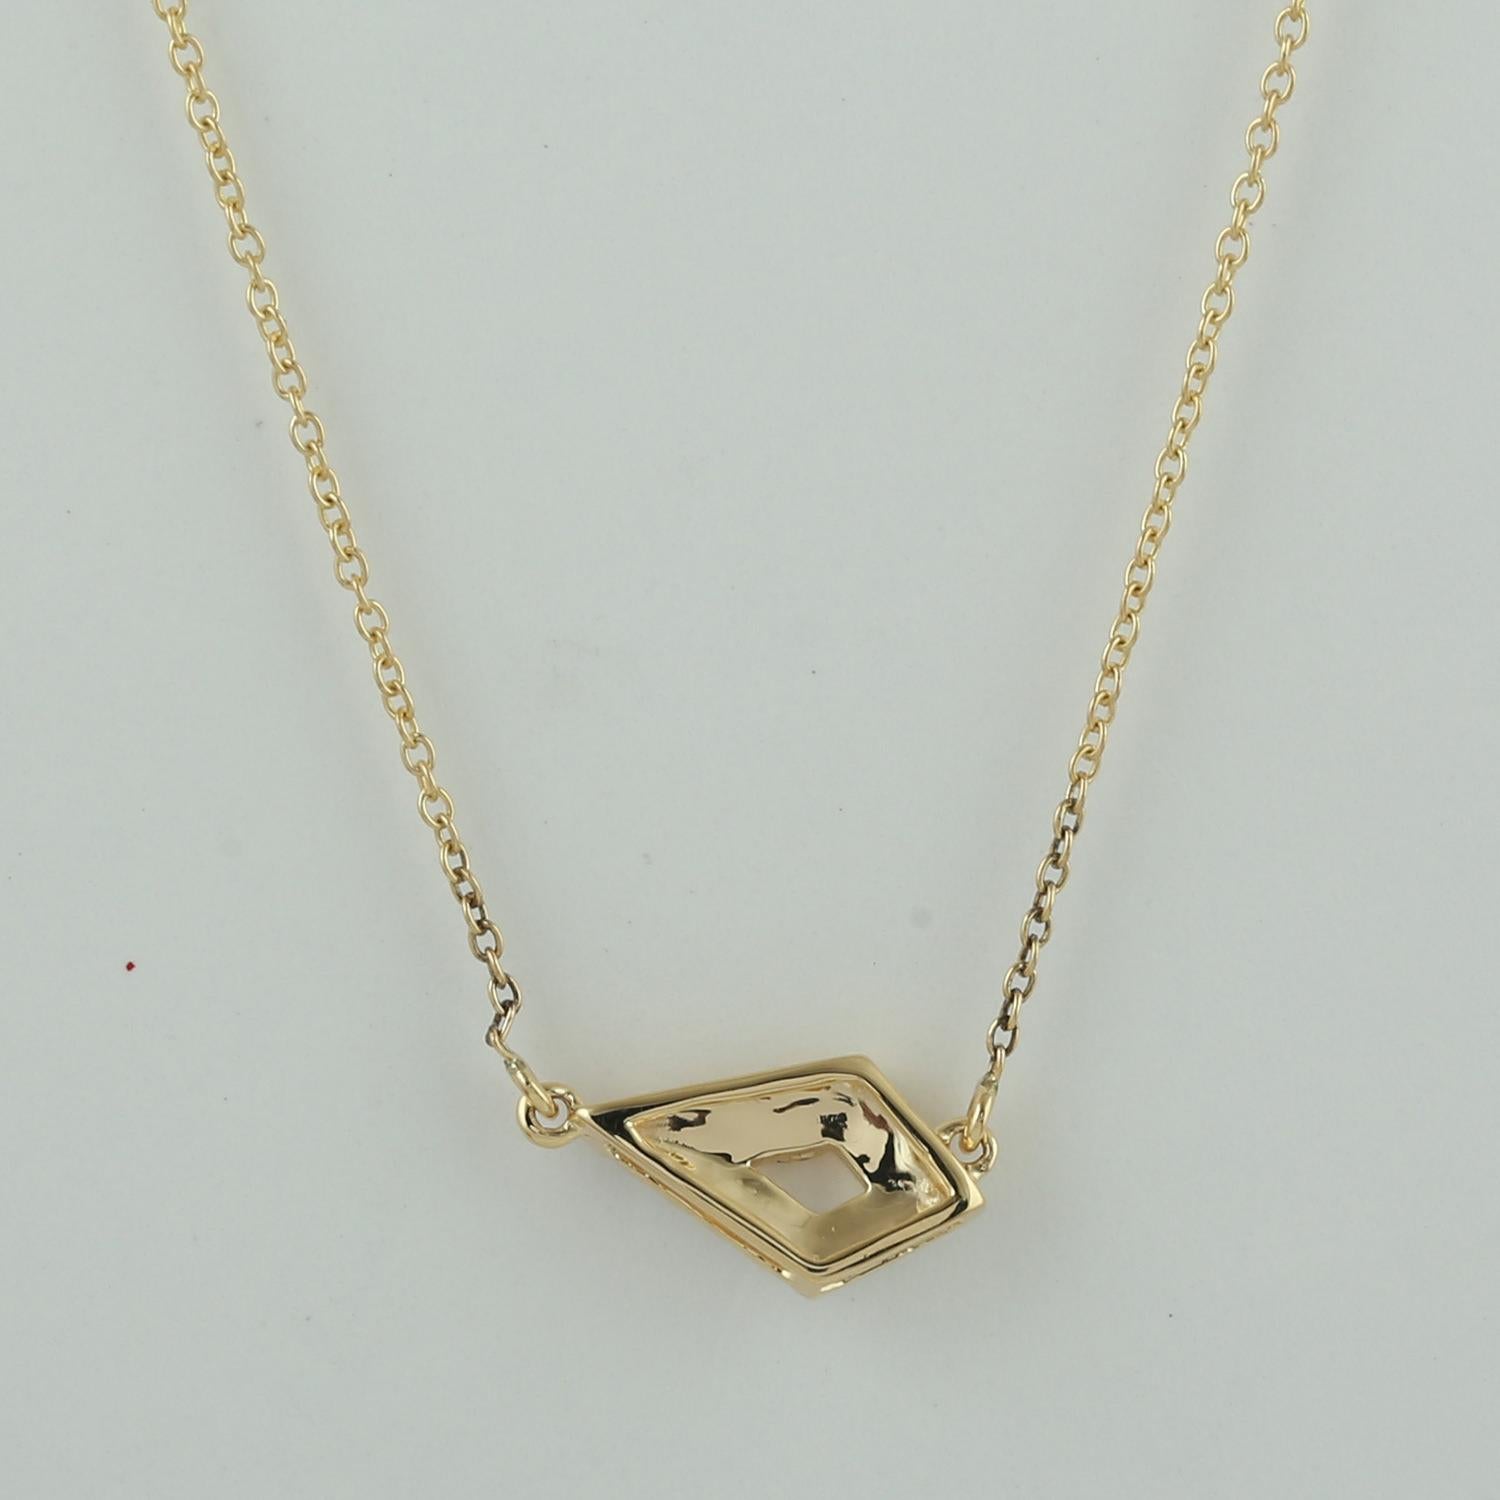 Contemporary Gemotric Shaped Pave Diamond Pendant Chain Necklace Made In 18k Yellow Gold For Sale